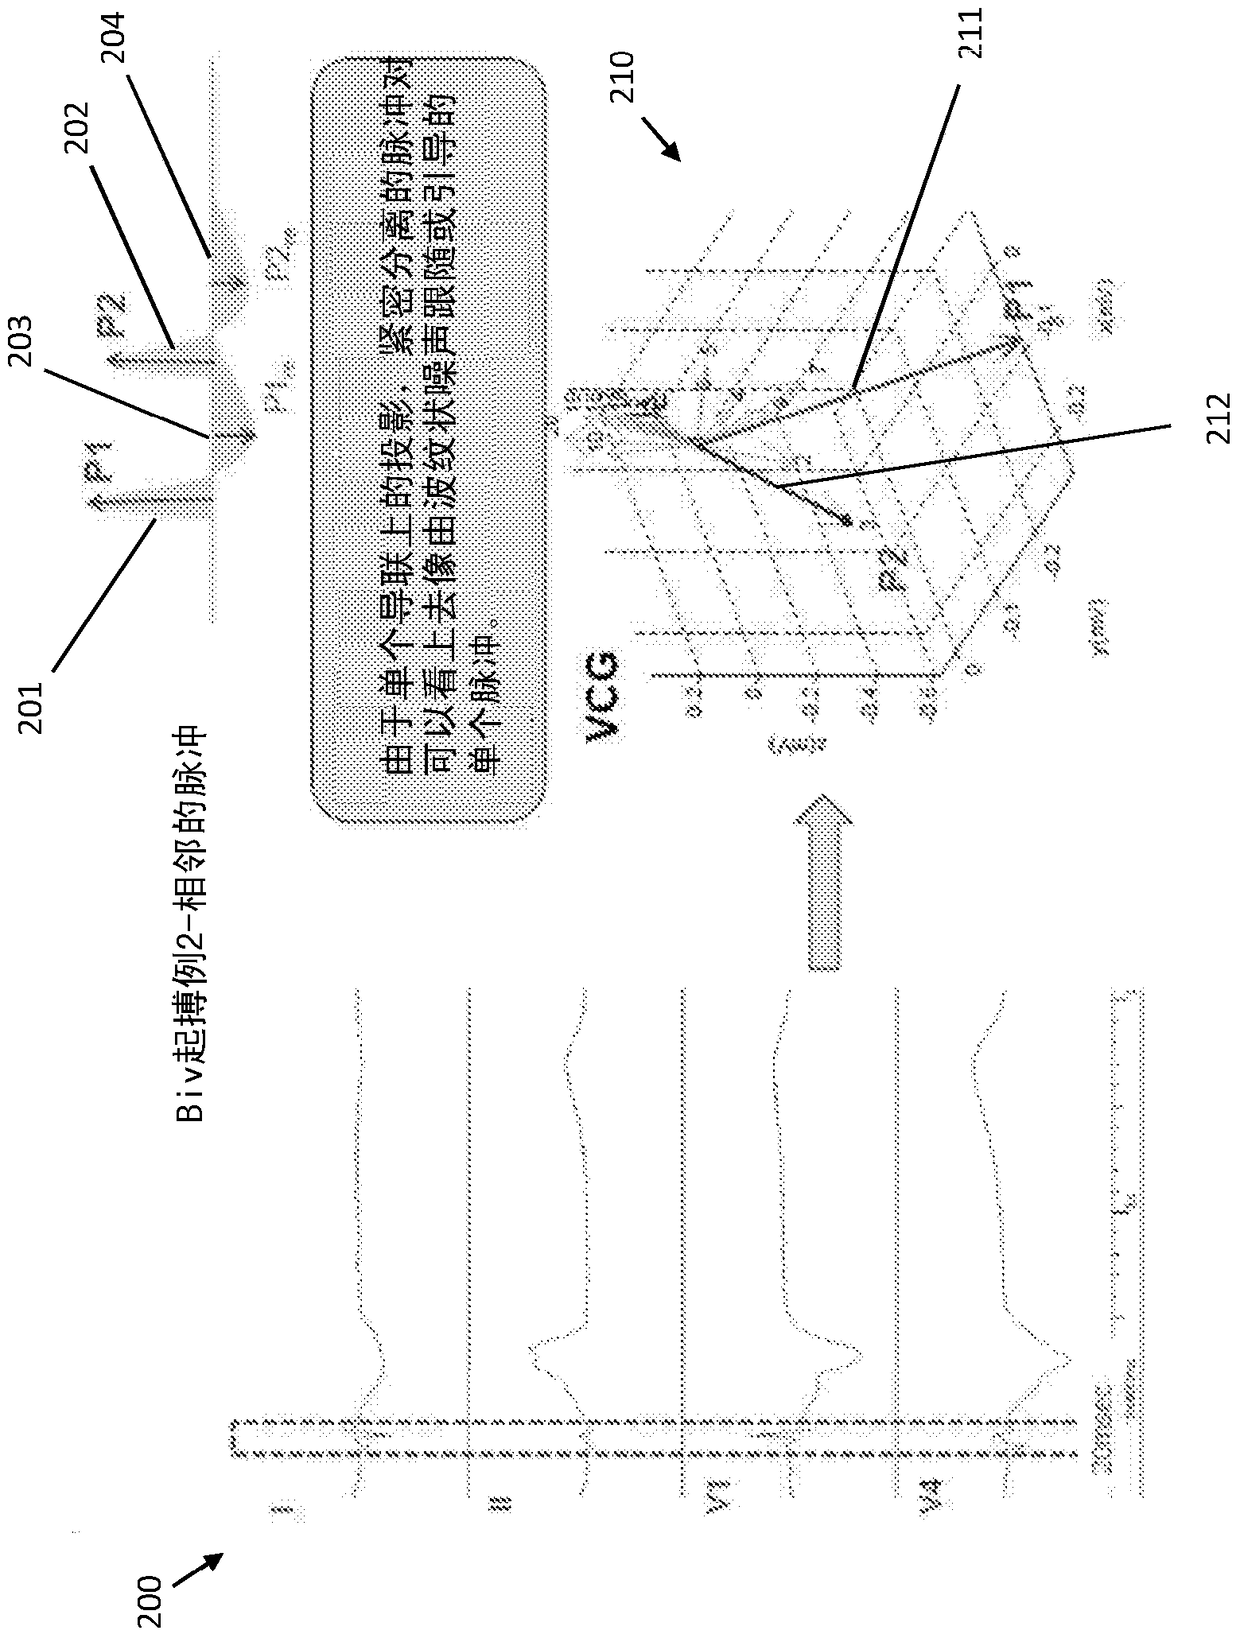 Systems and methods for biventricular pacemaker pulse detection in surface ecg